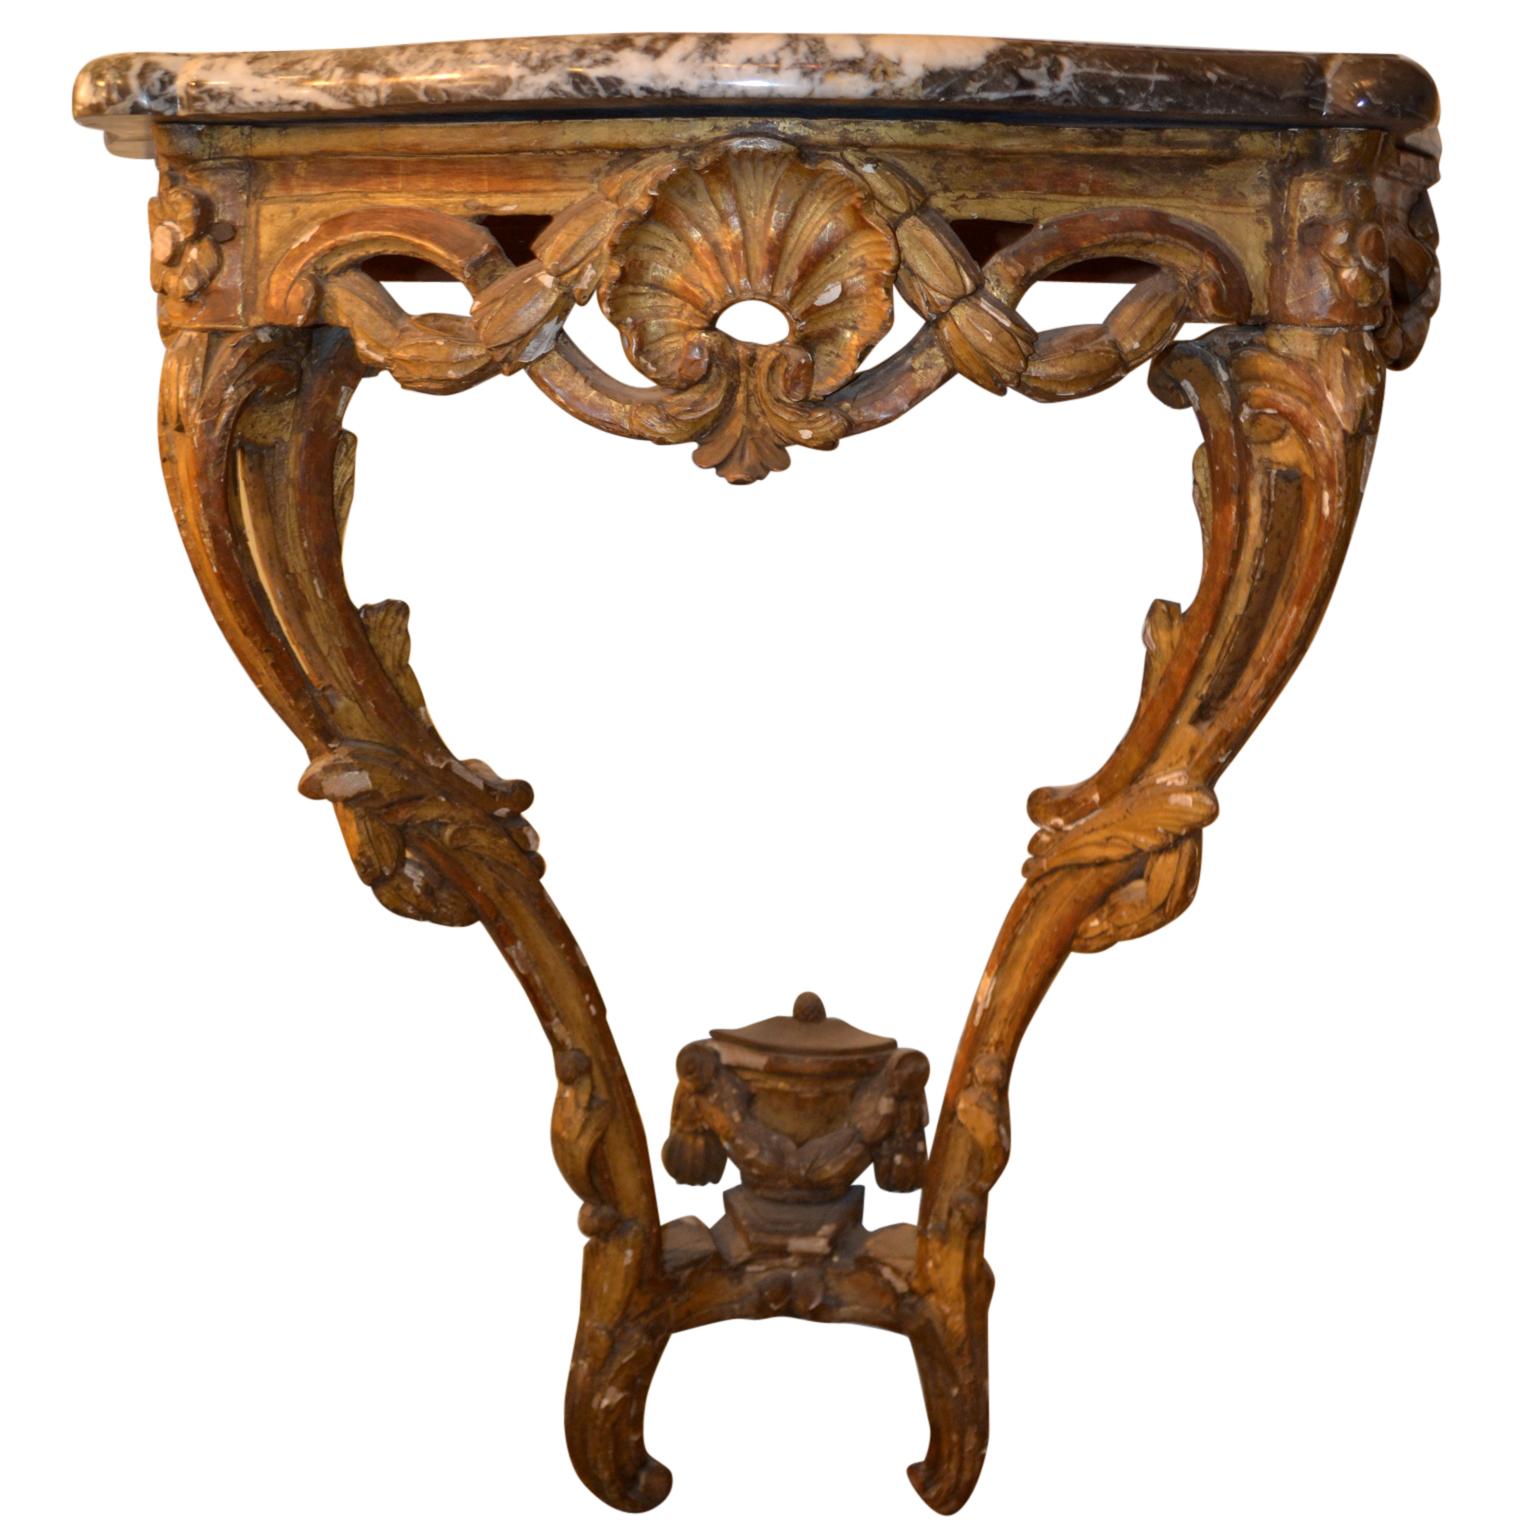 Period 18th Century Louis XV Carved Giltwood Console and Mirror In Good Condition For Sale In Vancouver, British Columbia